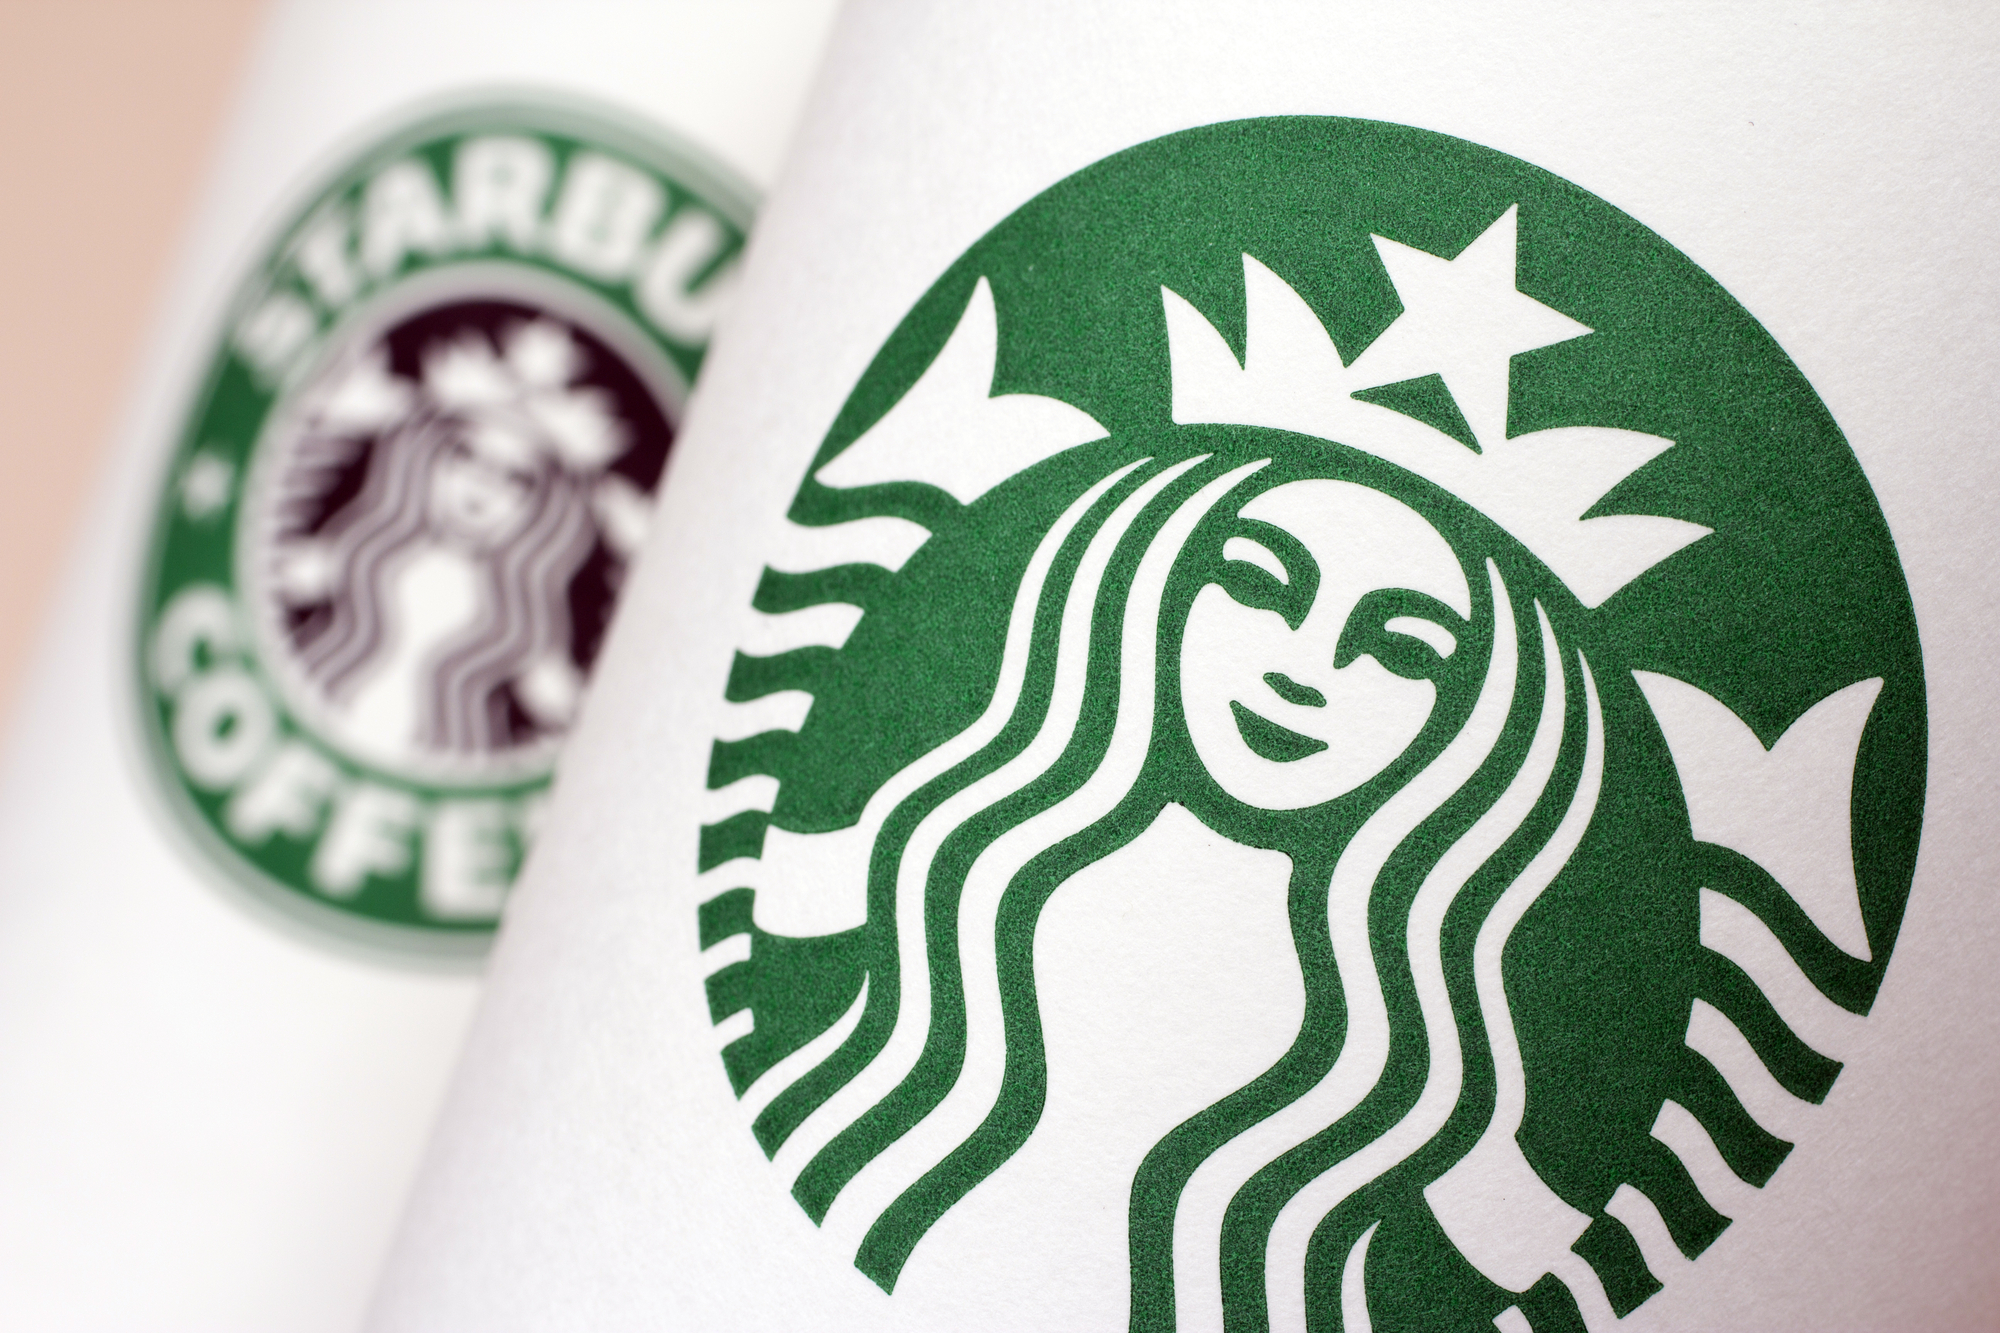 Starbucks is Facing a $5 Million Lawsuit Over Alleged Discrimination Against Lactose Intolerant People